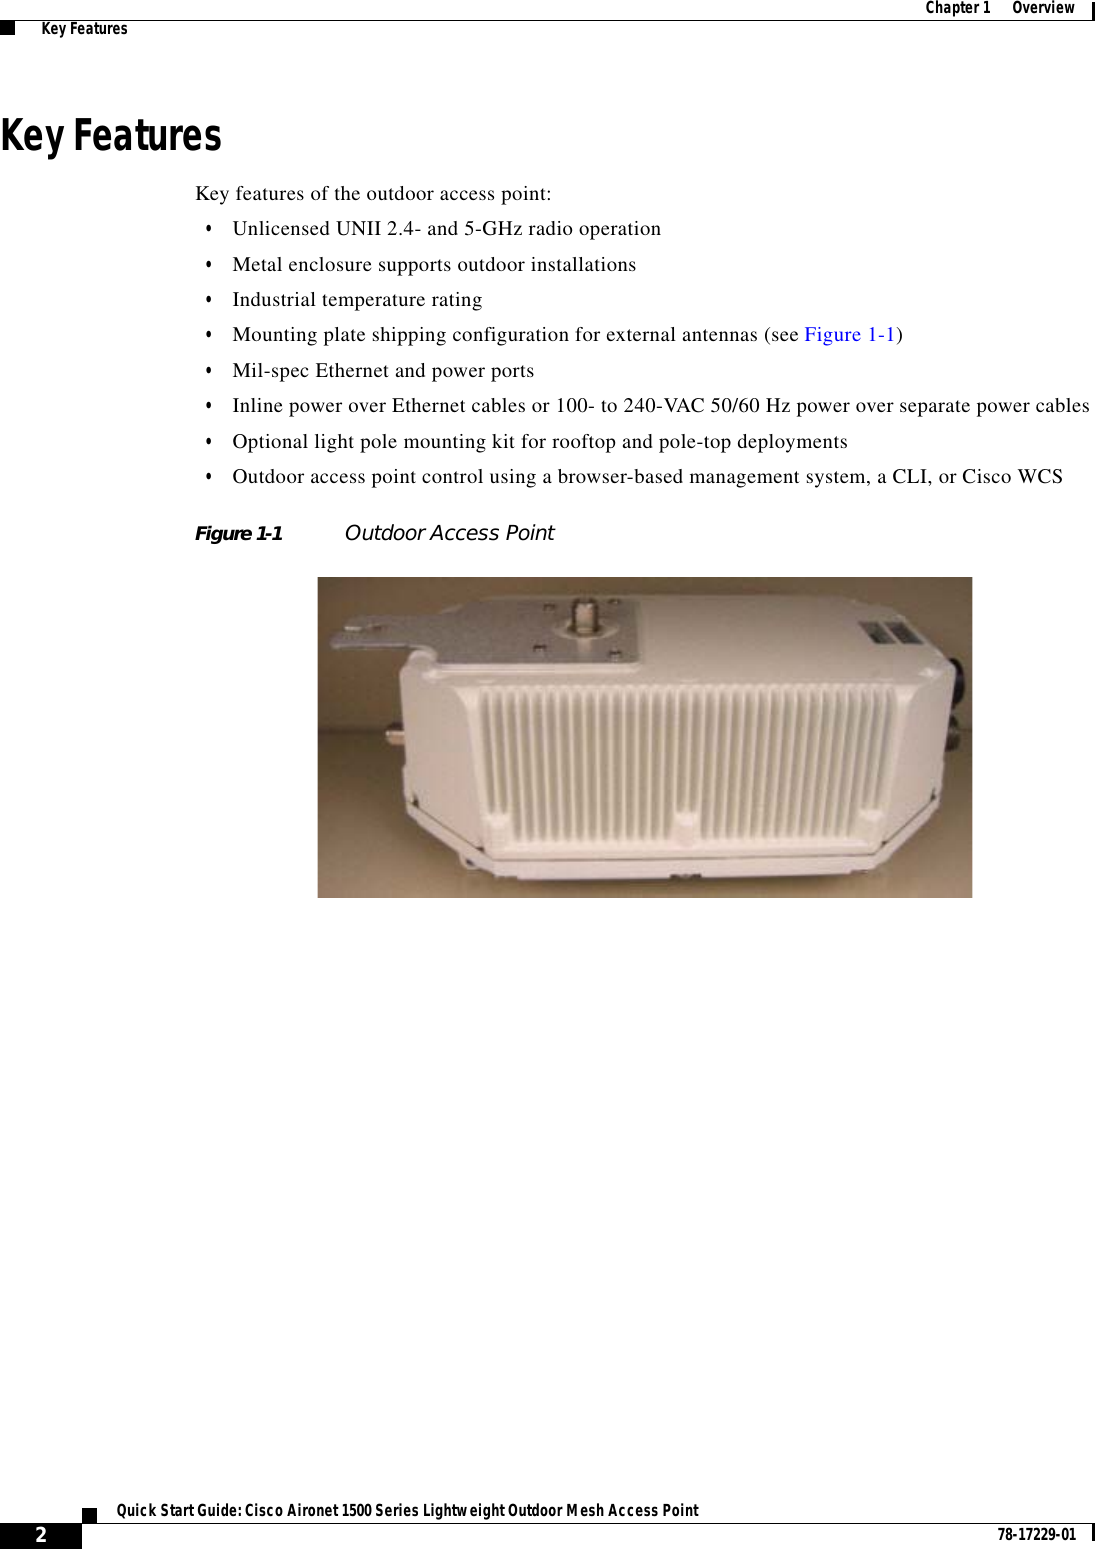  2Quick Start Guide: Cisco Aironet 1500 Series Lightweight Outdoor Mesh Access Point 78-17229-01Chapter 1      Overview  Key FeaturesKey FeaturesKey features of the outdoor access point:•Unlicensed UNII 2.4- and 5-GHz radio operation•Metal enclosure supports outdoor installations•Industrial temperature rating•Mounting plate shipping configuration for external antennas (see Figure 1-1)•Mil-spec Ethernet and power ports•Inline power over Ethernet cables or 100- to 240-VAC 50/60 Hz power over separate power cables•Optional light pole mounting kit for rooftop and pole-top deployments•Outdoor access point control using a browser-based management system, a CLI, or Cisco WCSFigure 1-1 Outdoor Access Point